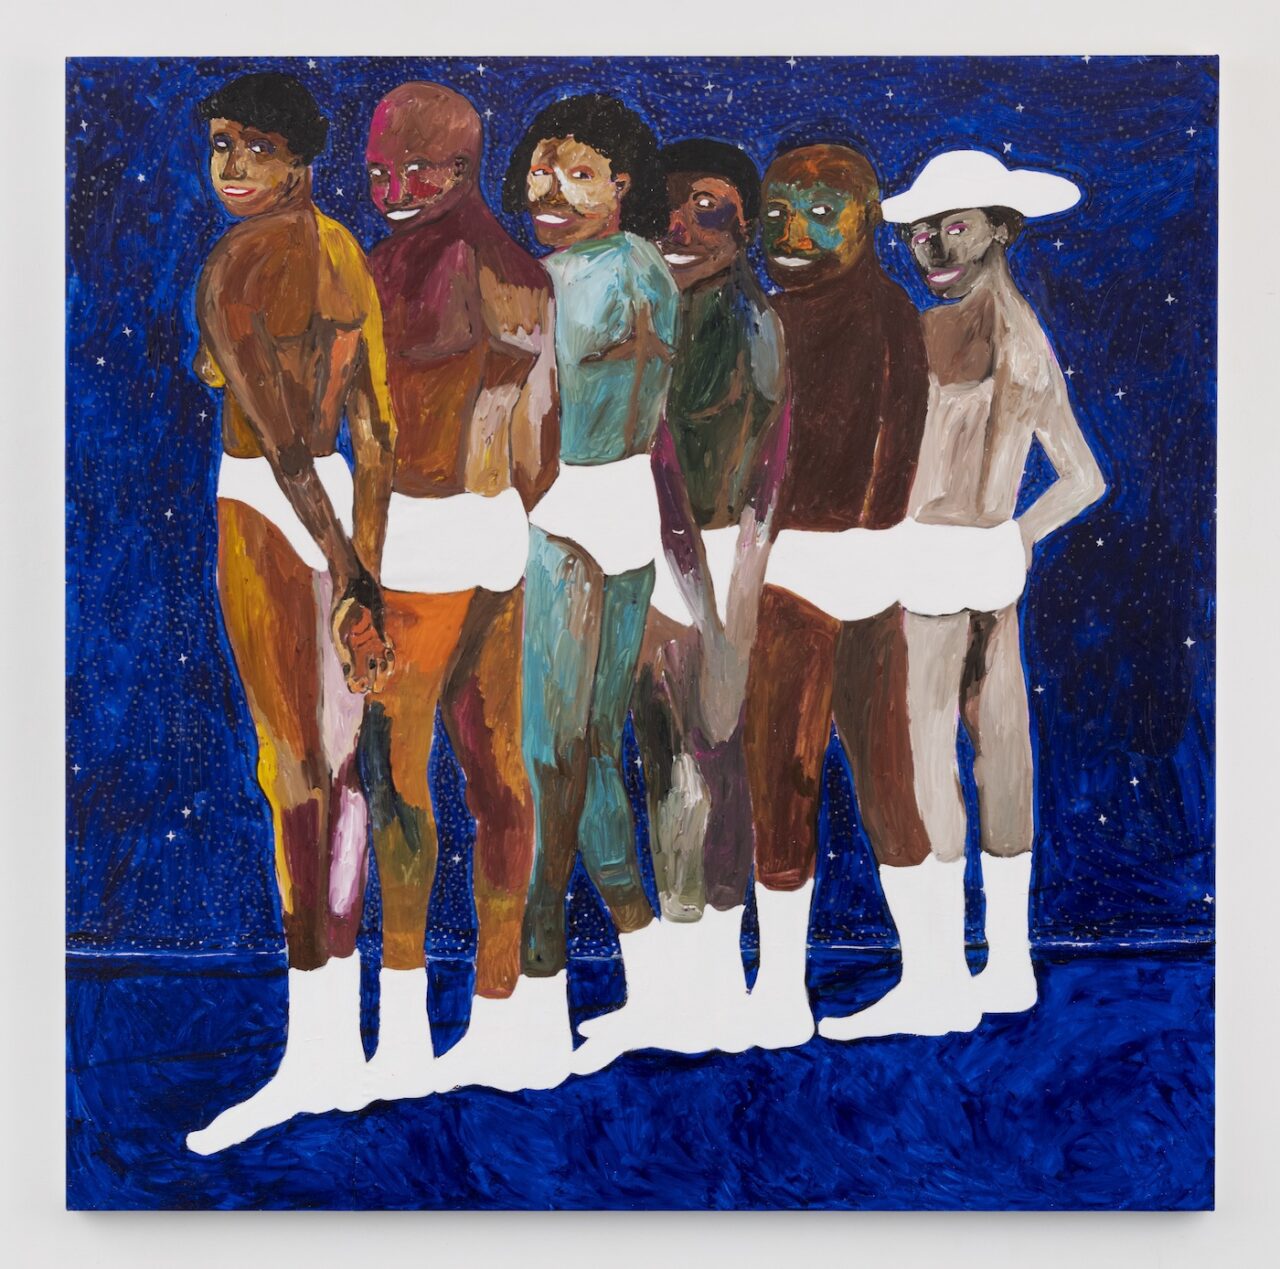 Gideon Appah, Remember Our Stars, 2020. Oil and acrylic on canvas. Photo: Adam Reich